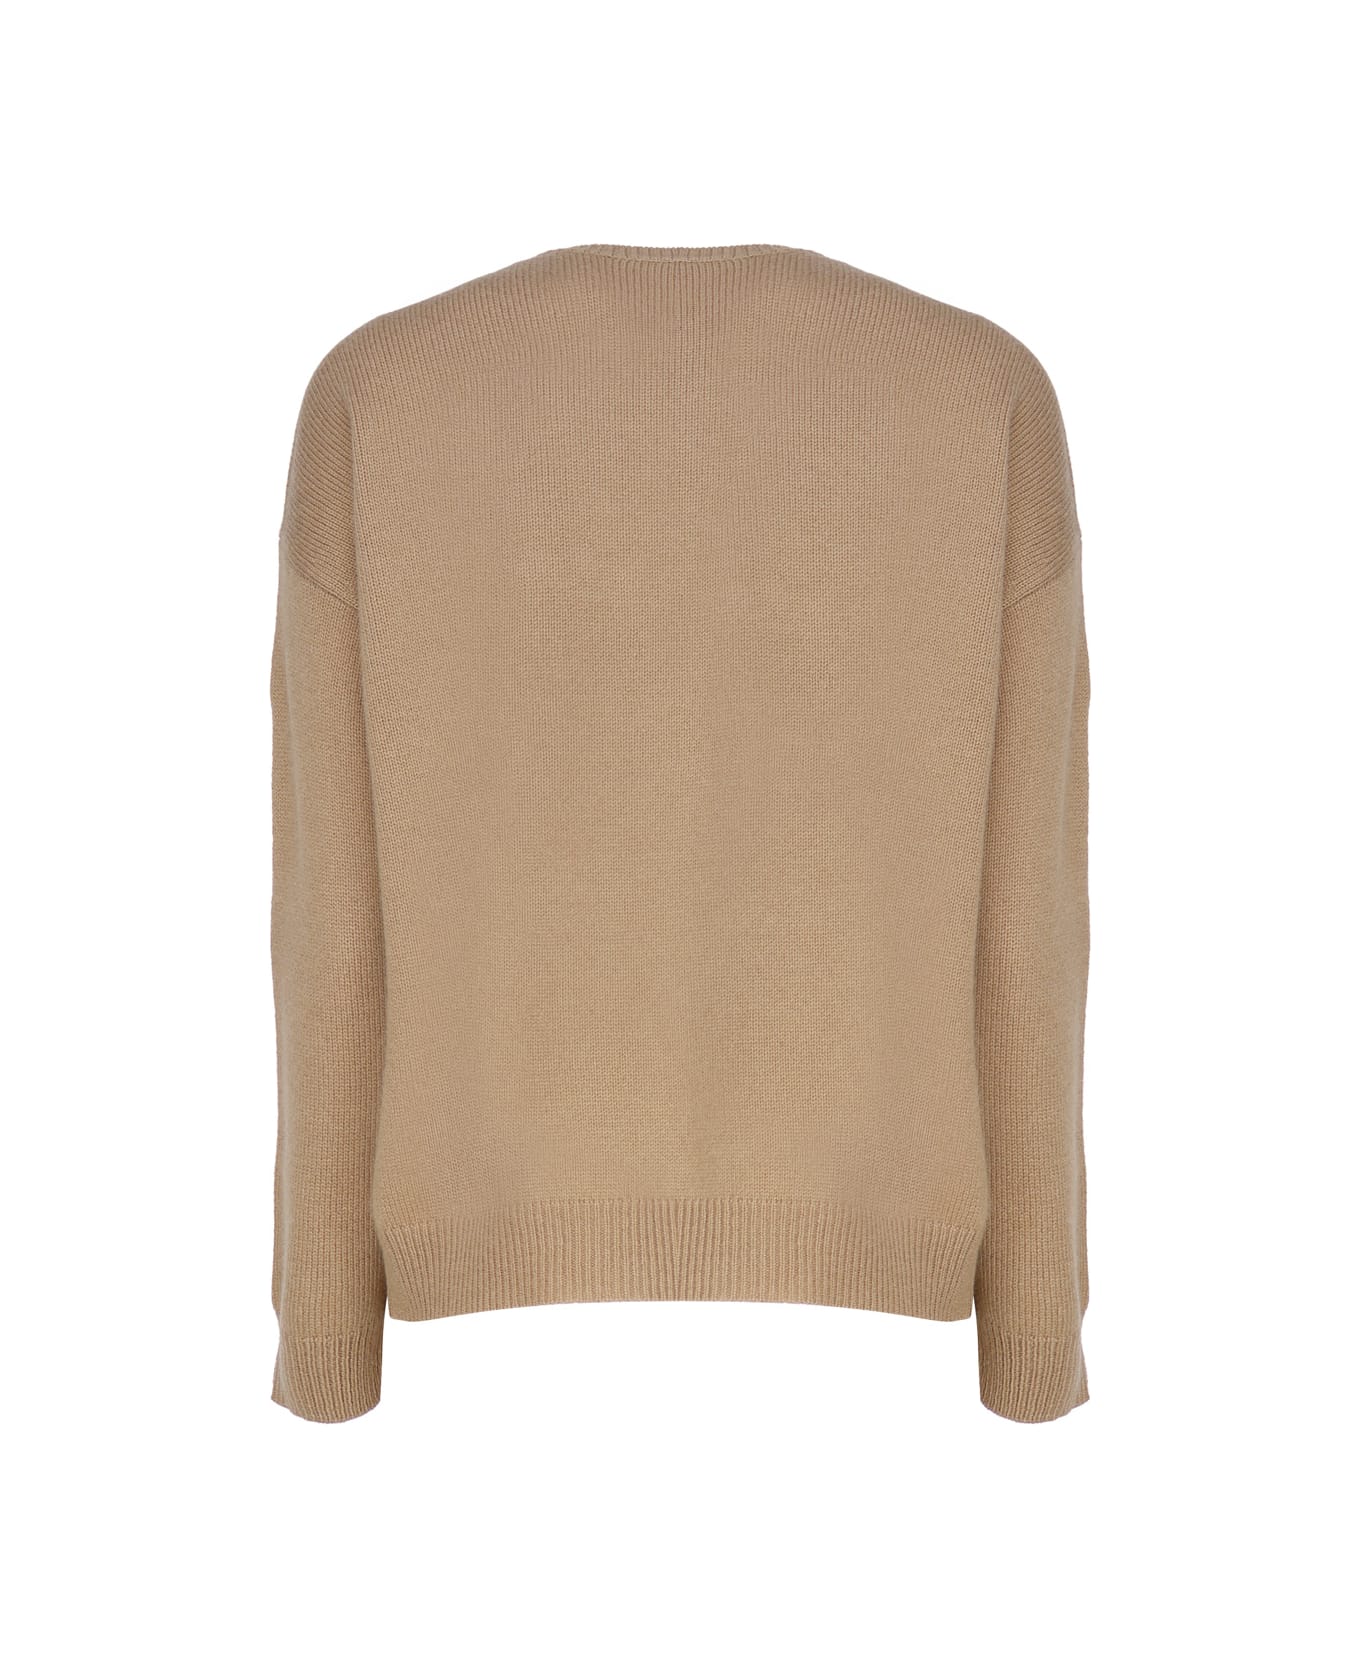 Max Mara Cashmere Sweater With Jewel Embroidery - Brown